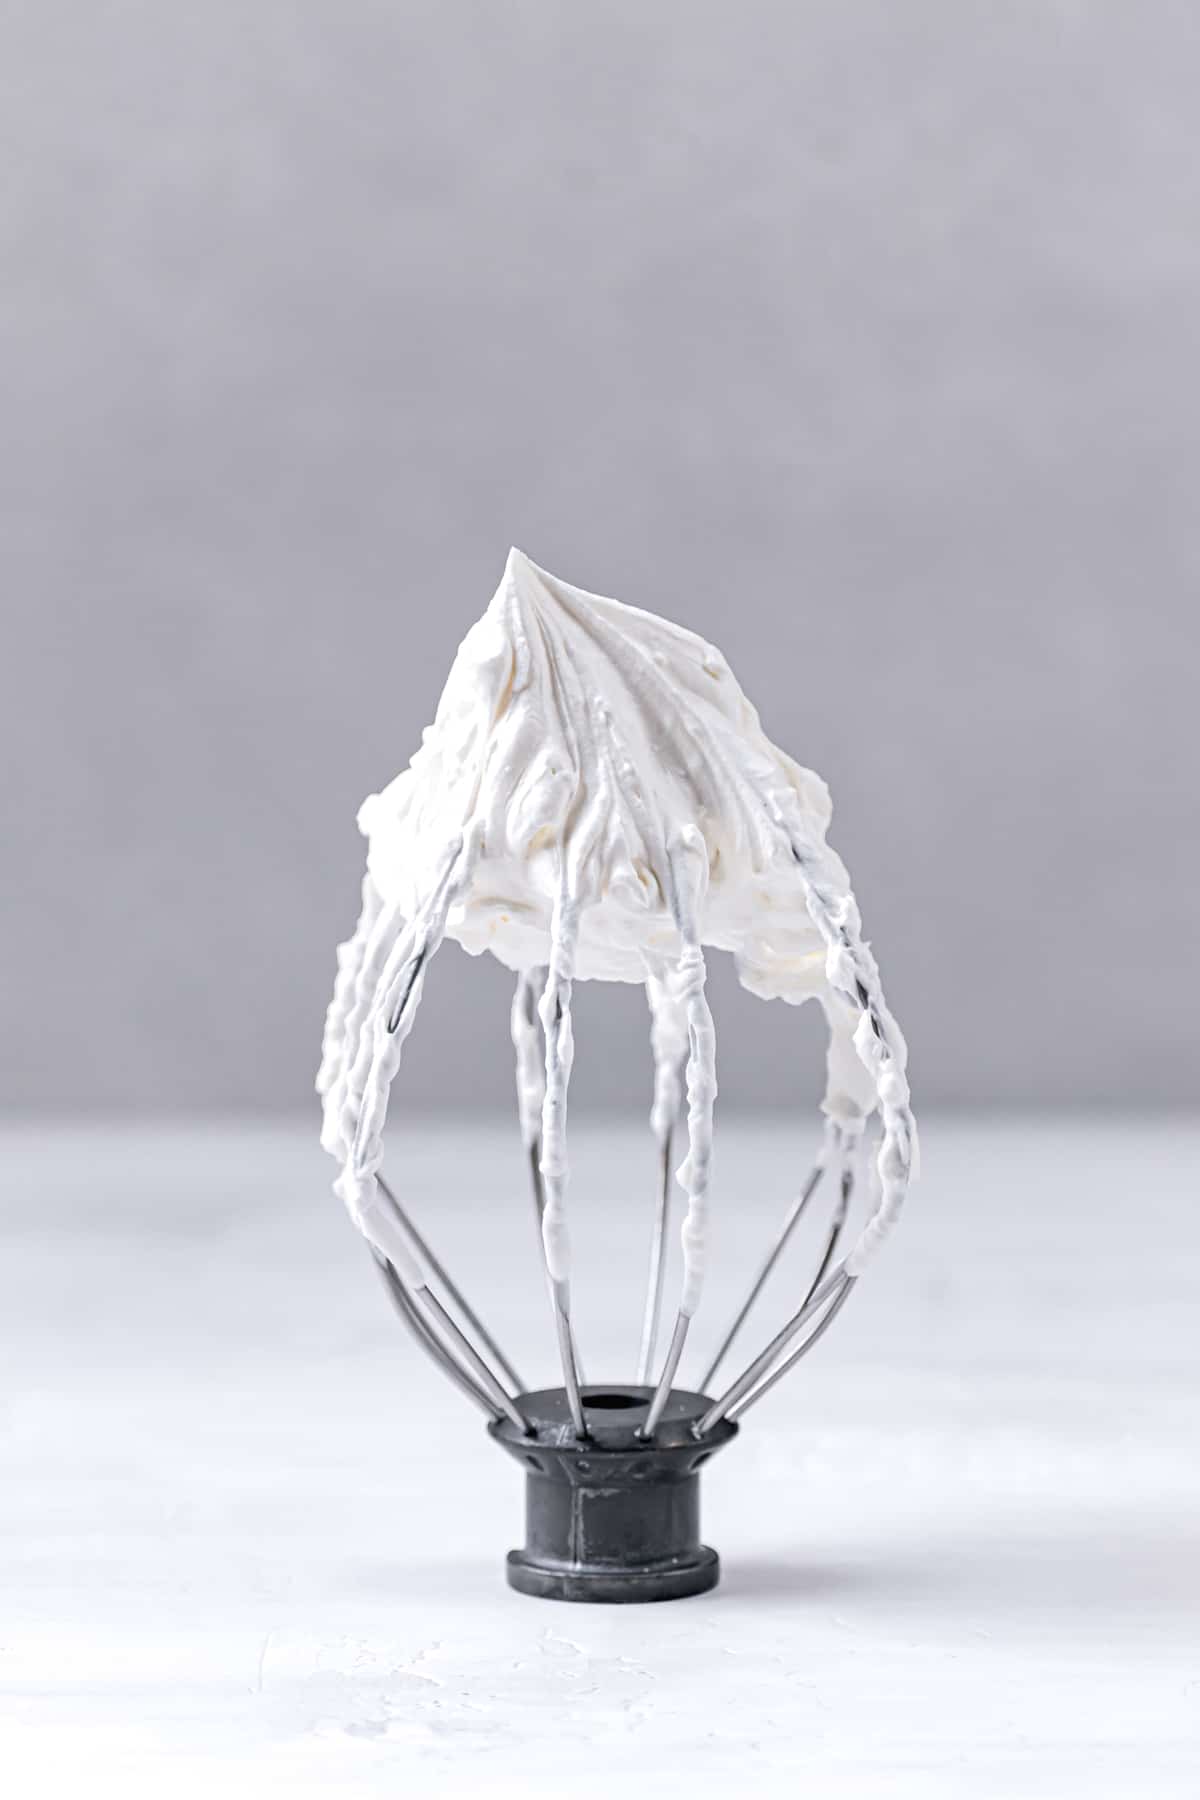 frosting on whisk.